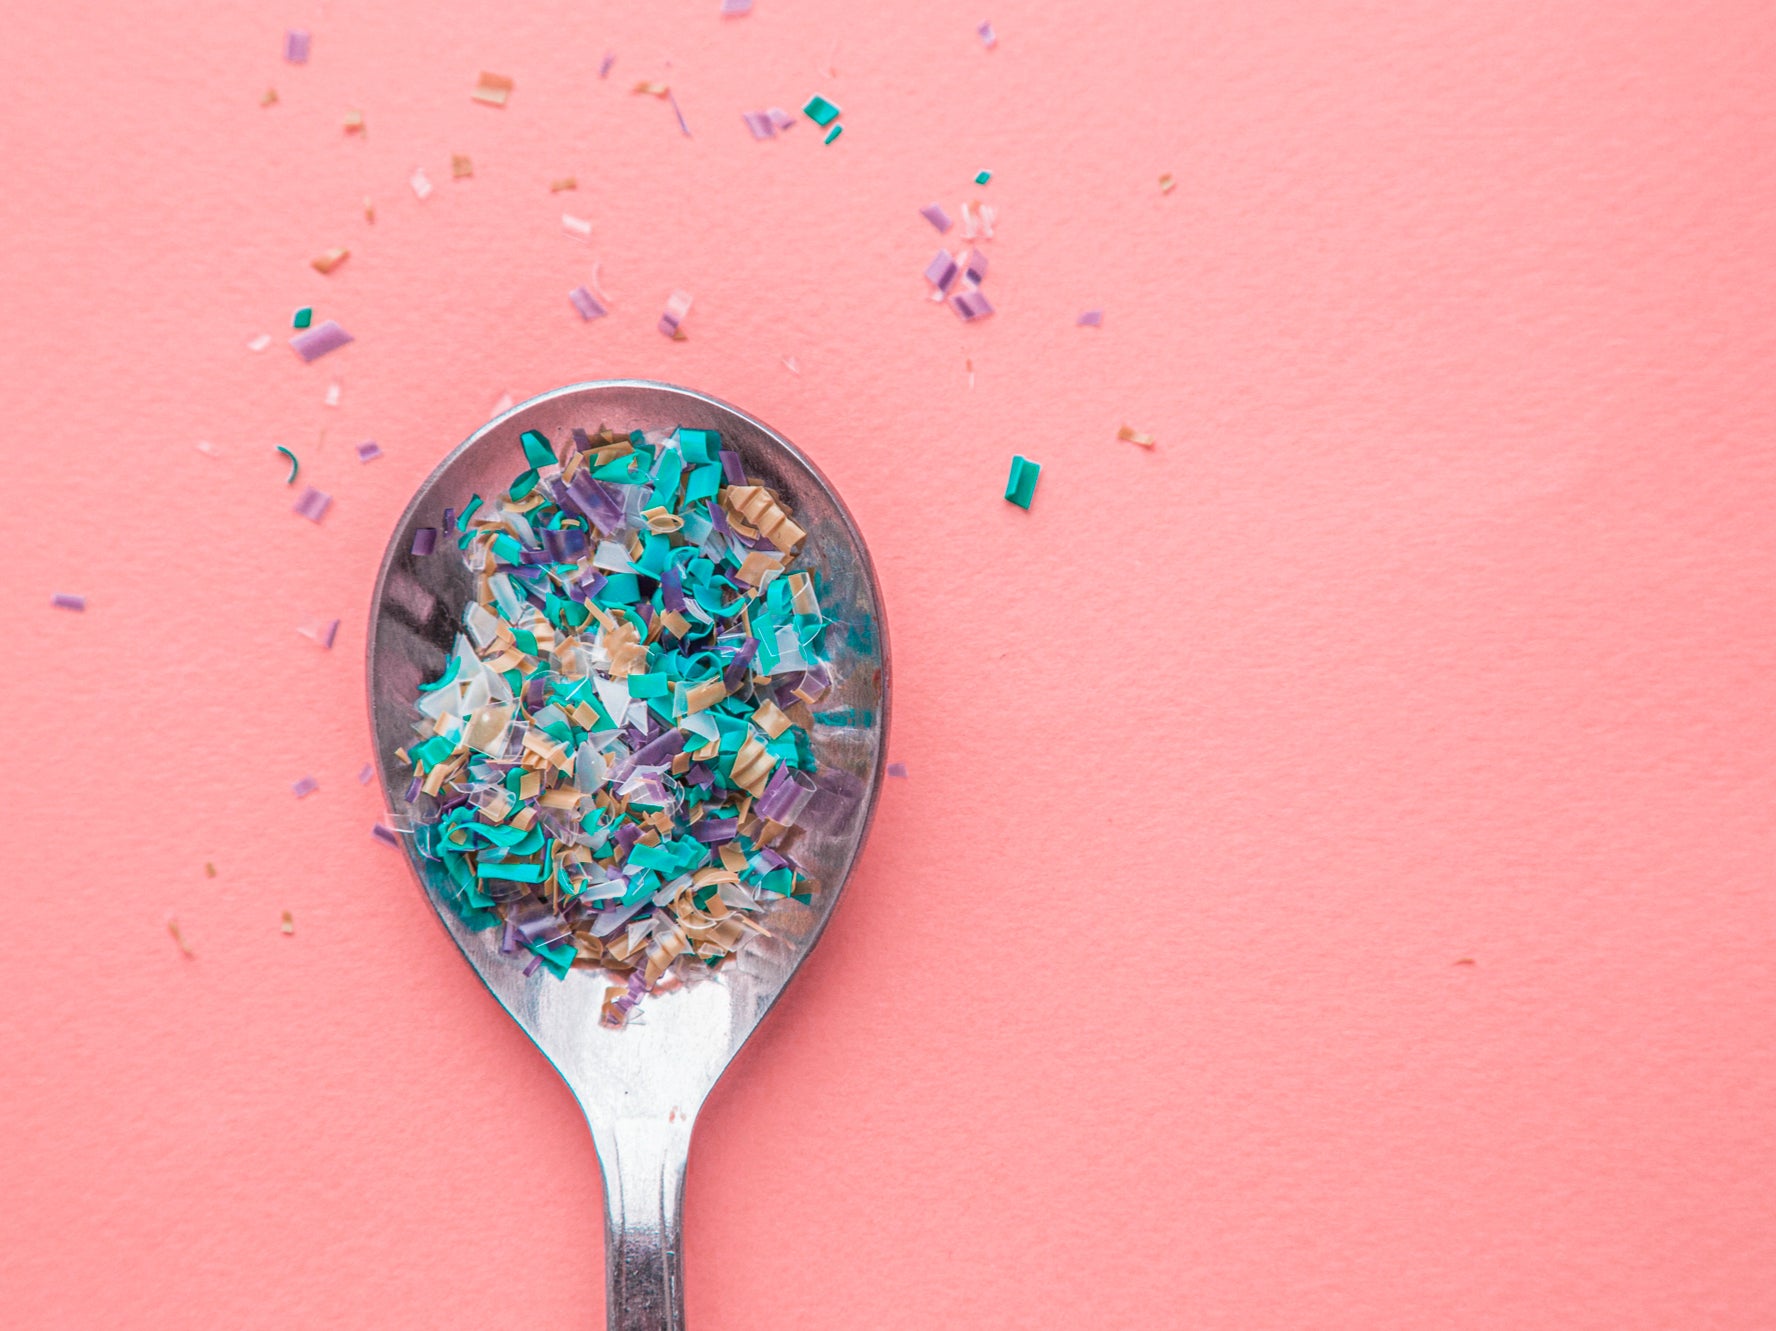 A spoon that transports microplastics (Getty Images/iStockphoto)